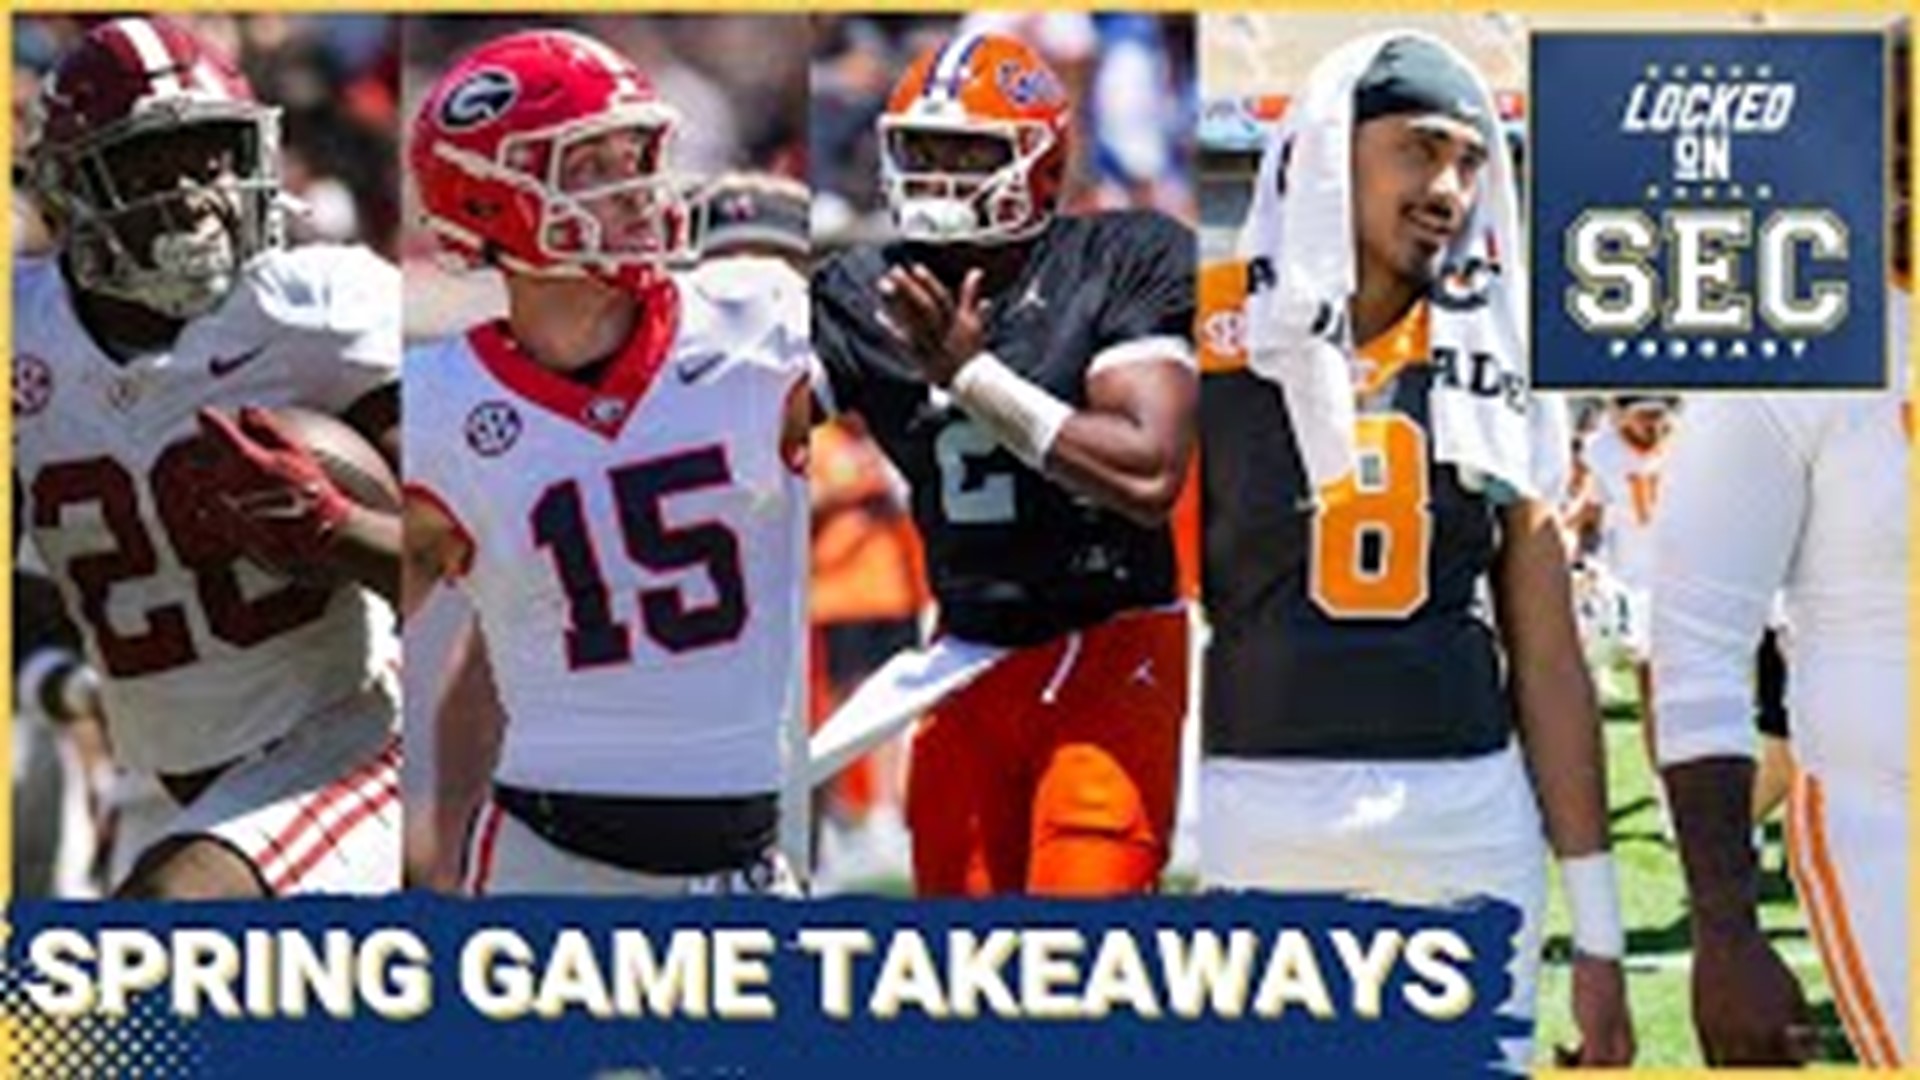 On today's show, we are bringing you our takeaways from all EIGHT SEC Spring Games that took place this past Saturday.